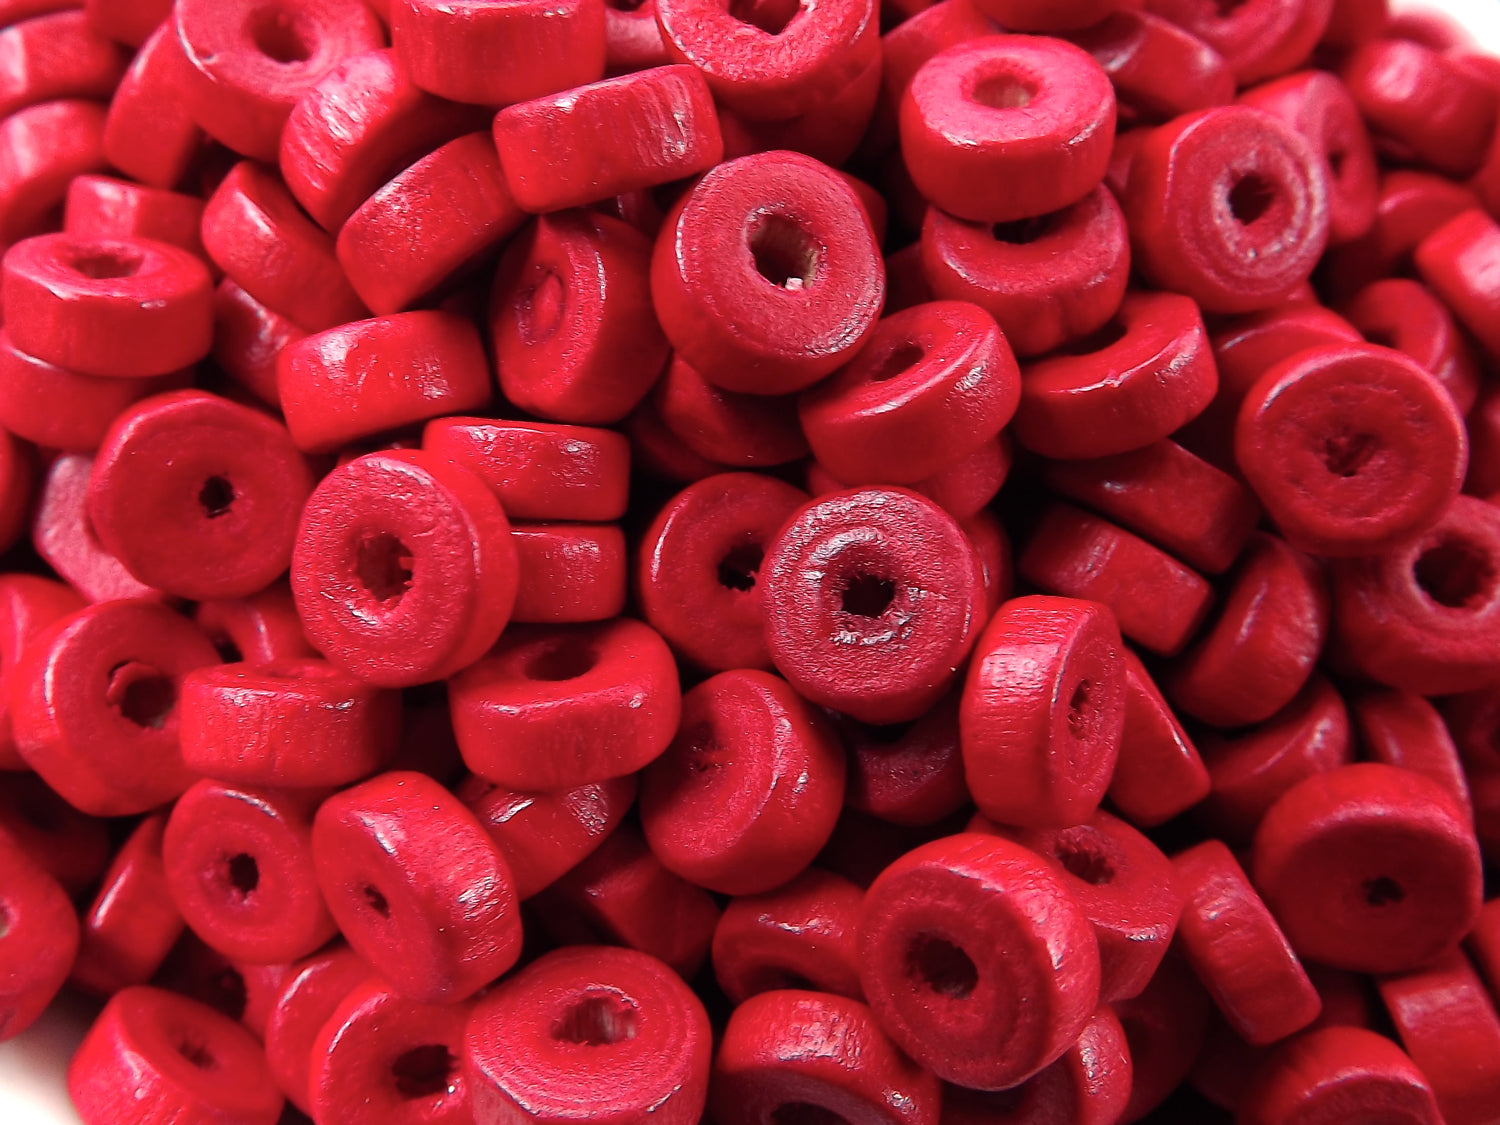 Poppy Red Round Rondelle Heishi Wood Beads Satin Varnished Plain Simple Round Smooth Ball Bead Spacers 8mm Choose 50pcs, 200pcs or 400pcs